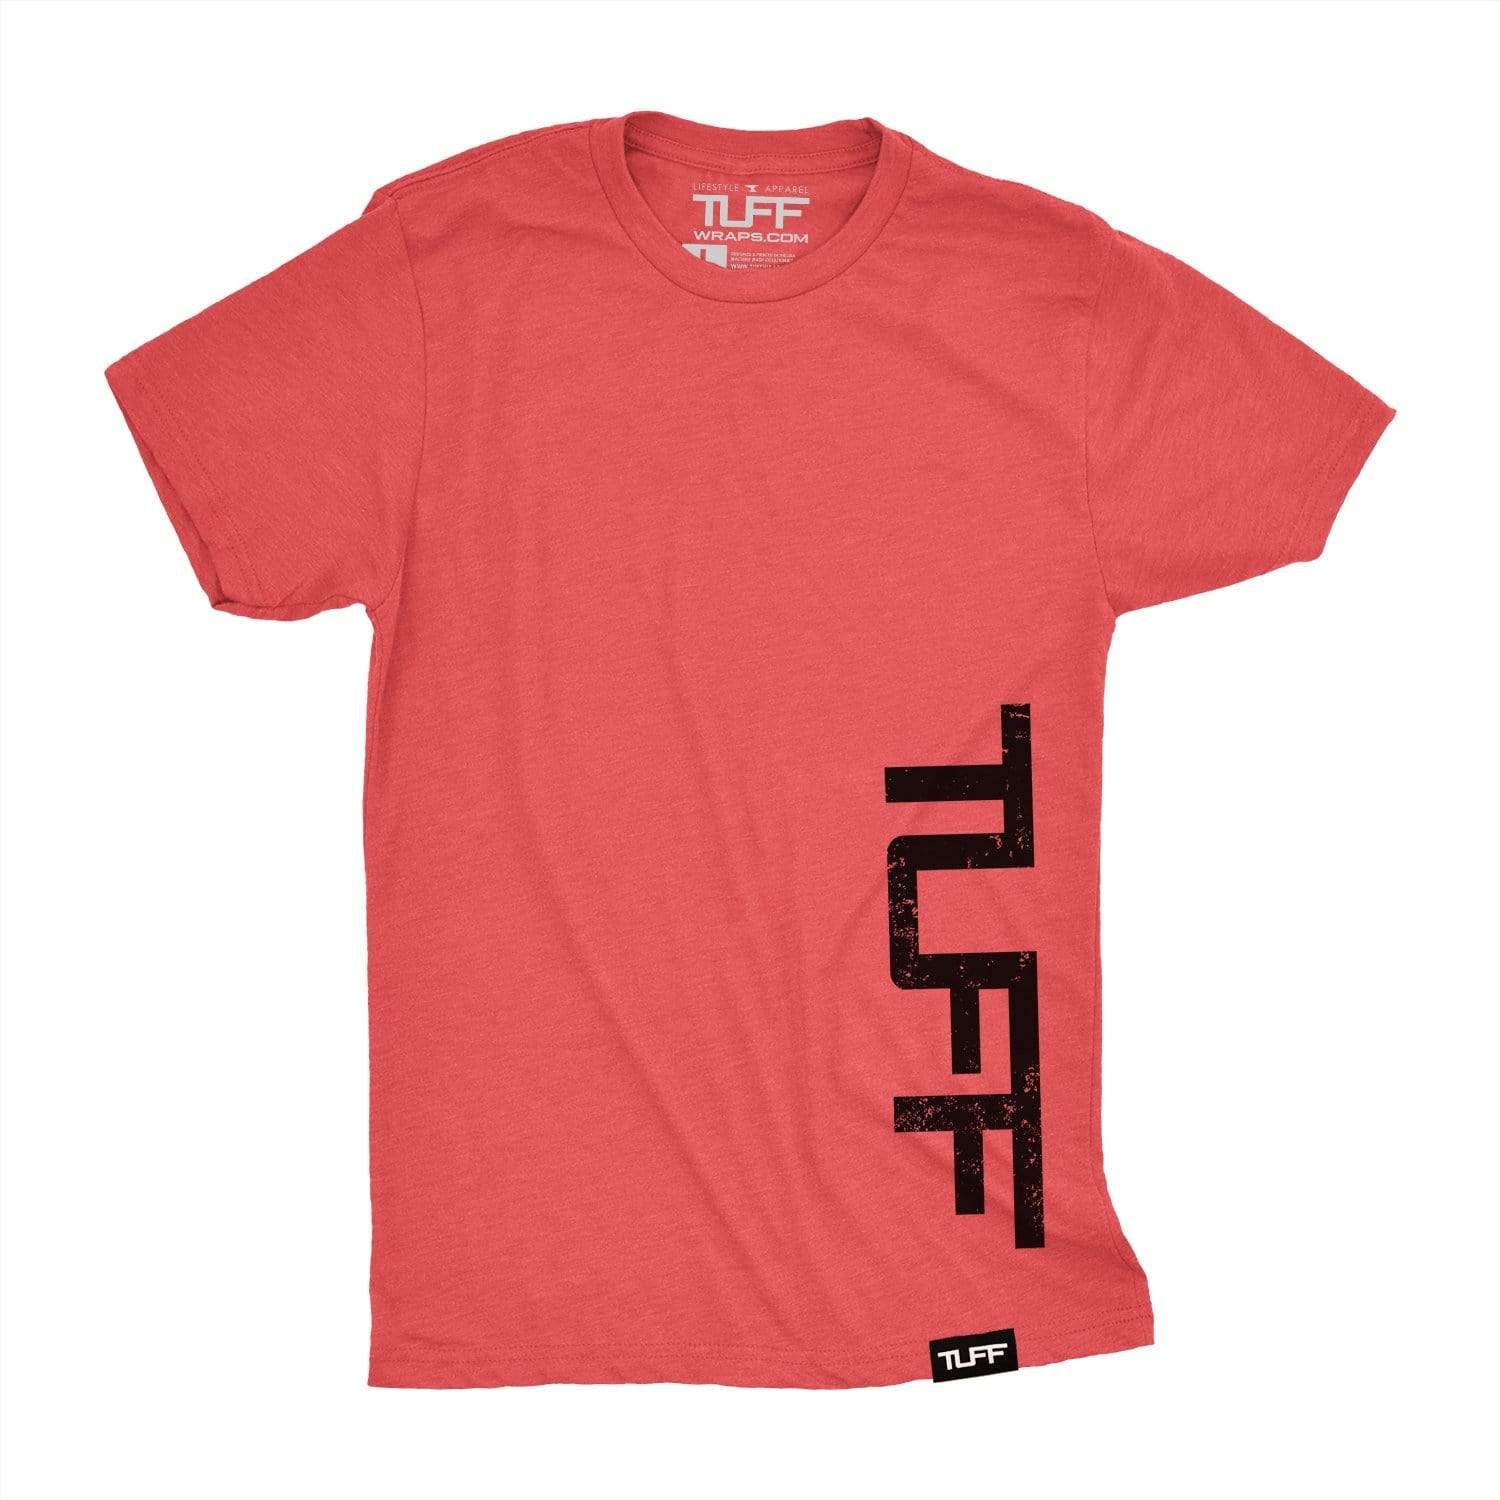 Tuff Side Tee - Special S / Vintage Red TUFF